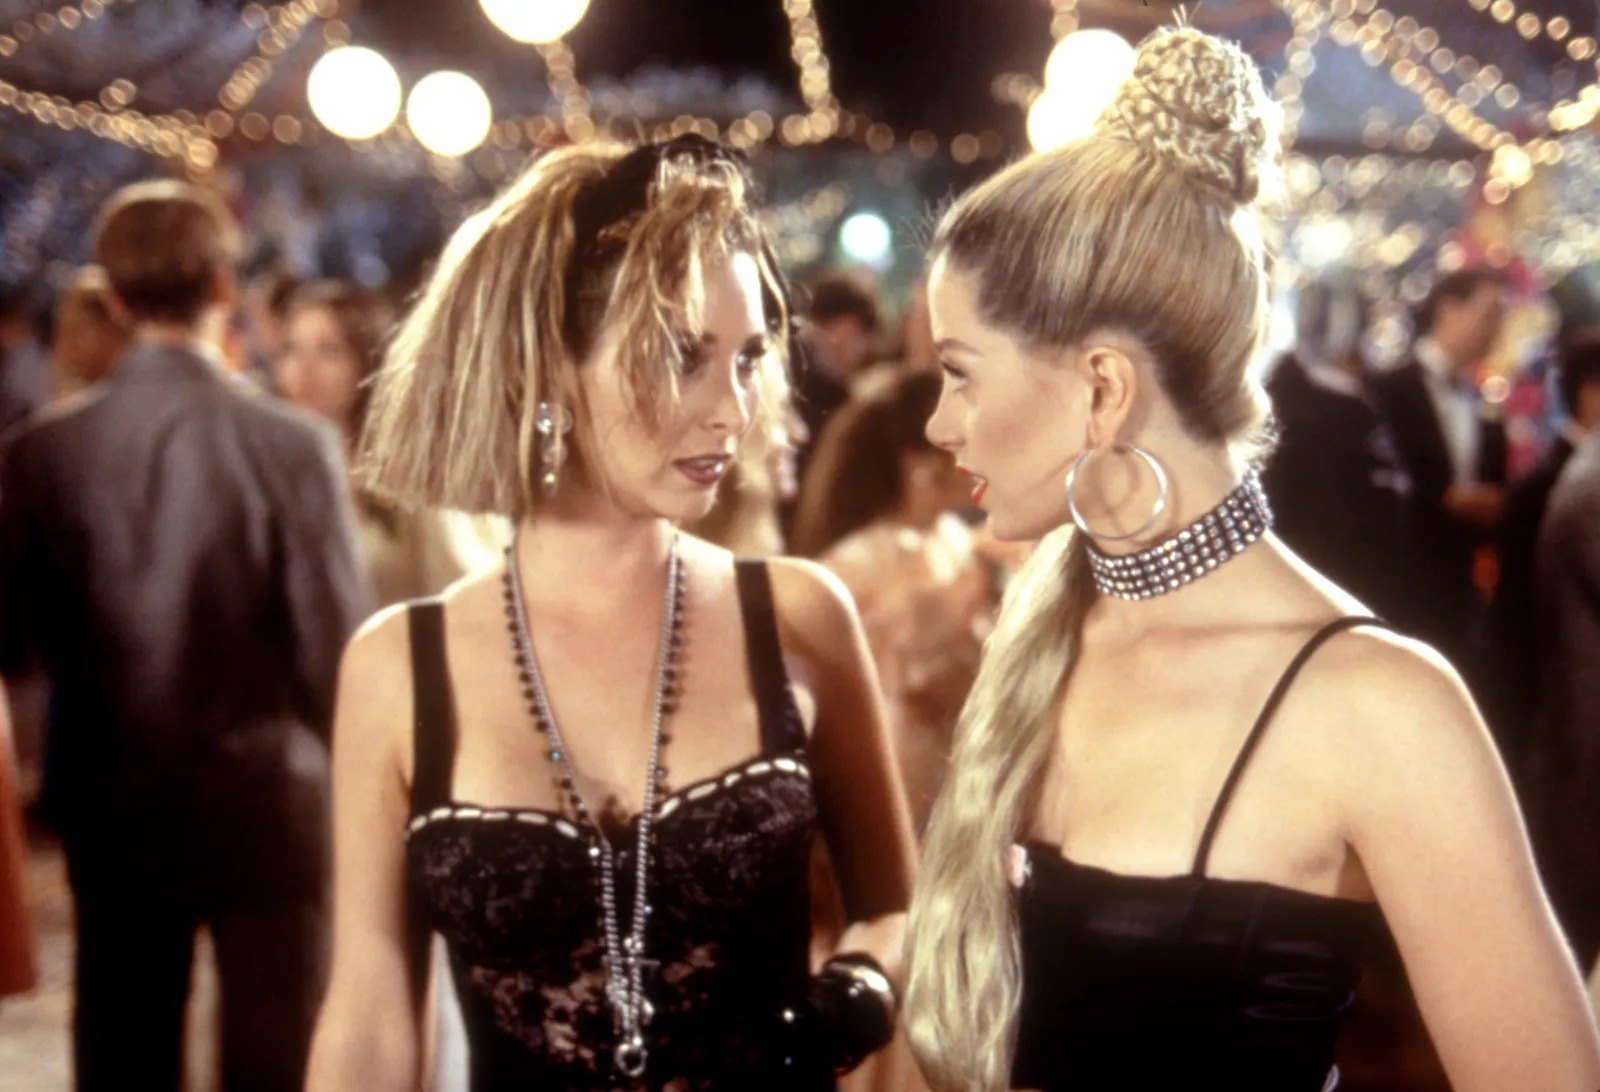 Romy and Michele's goth fashion in high school